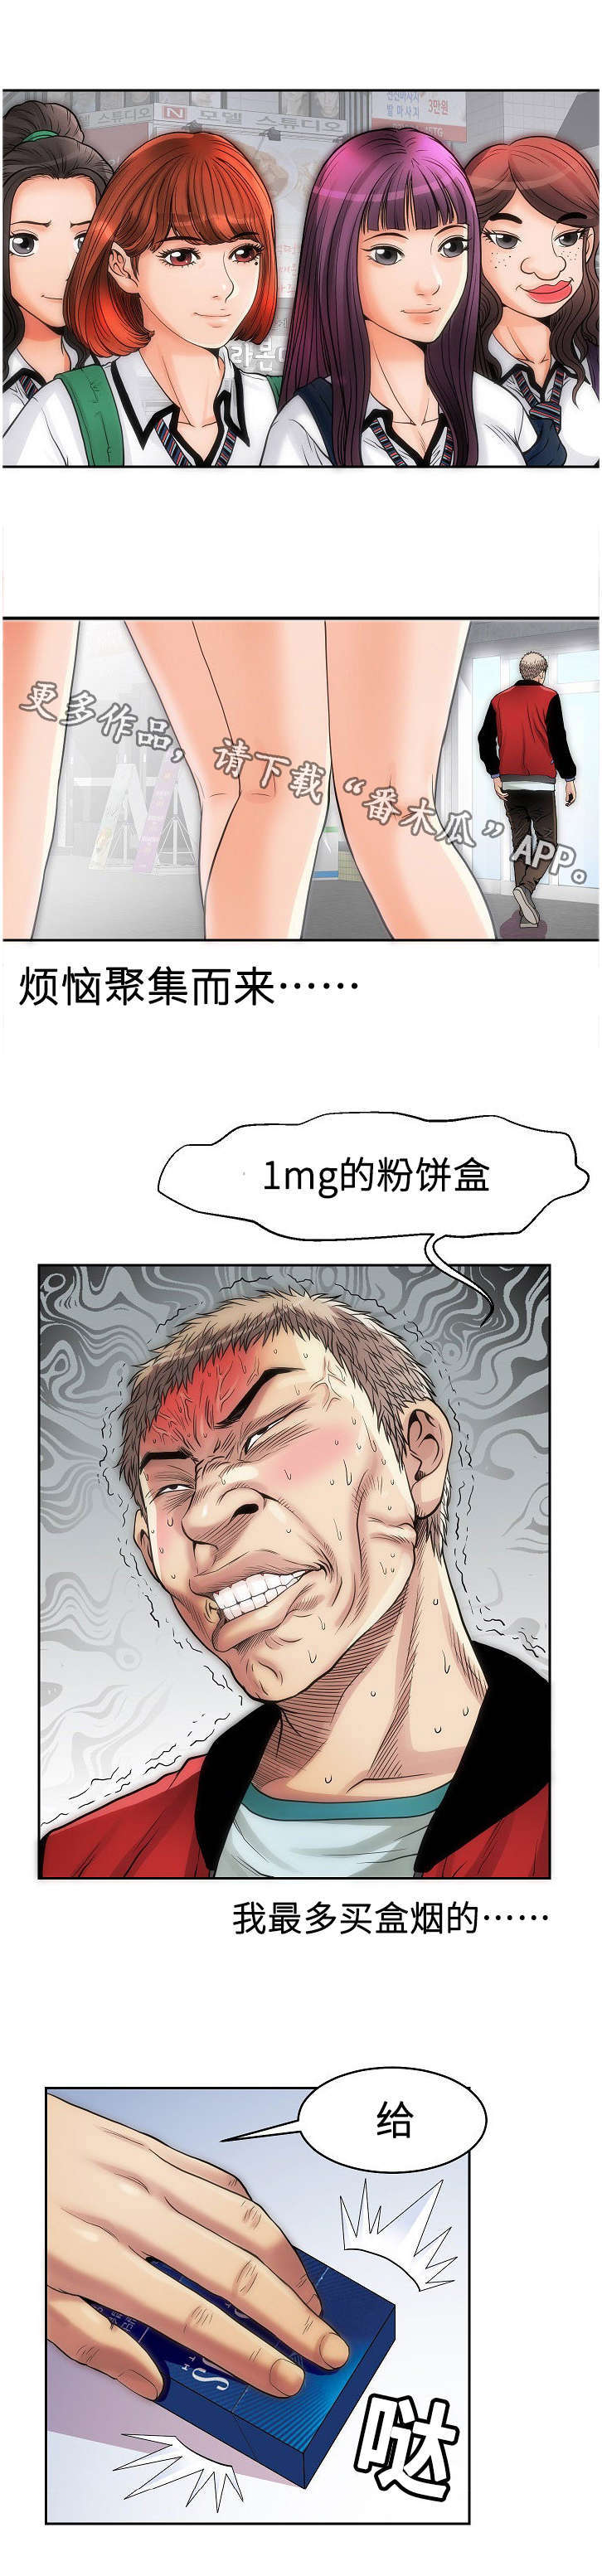 第13章：买烟6